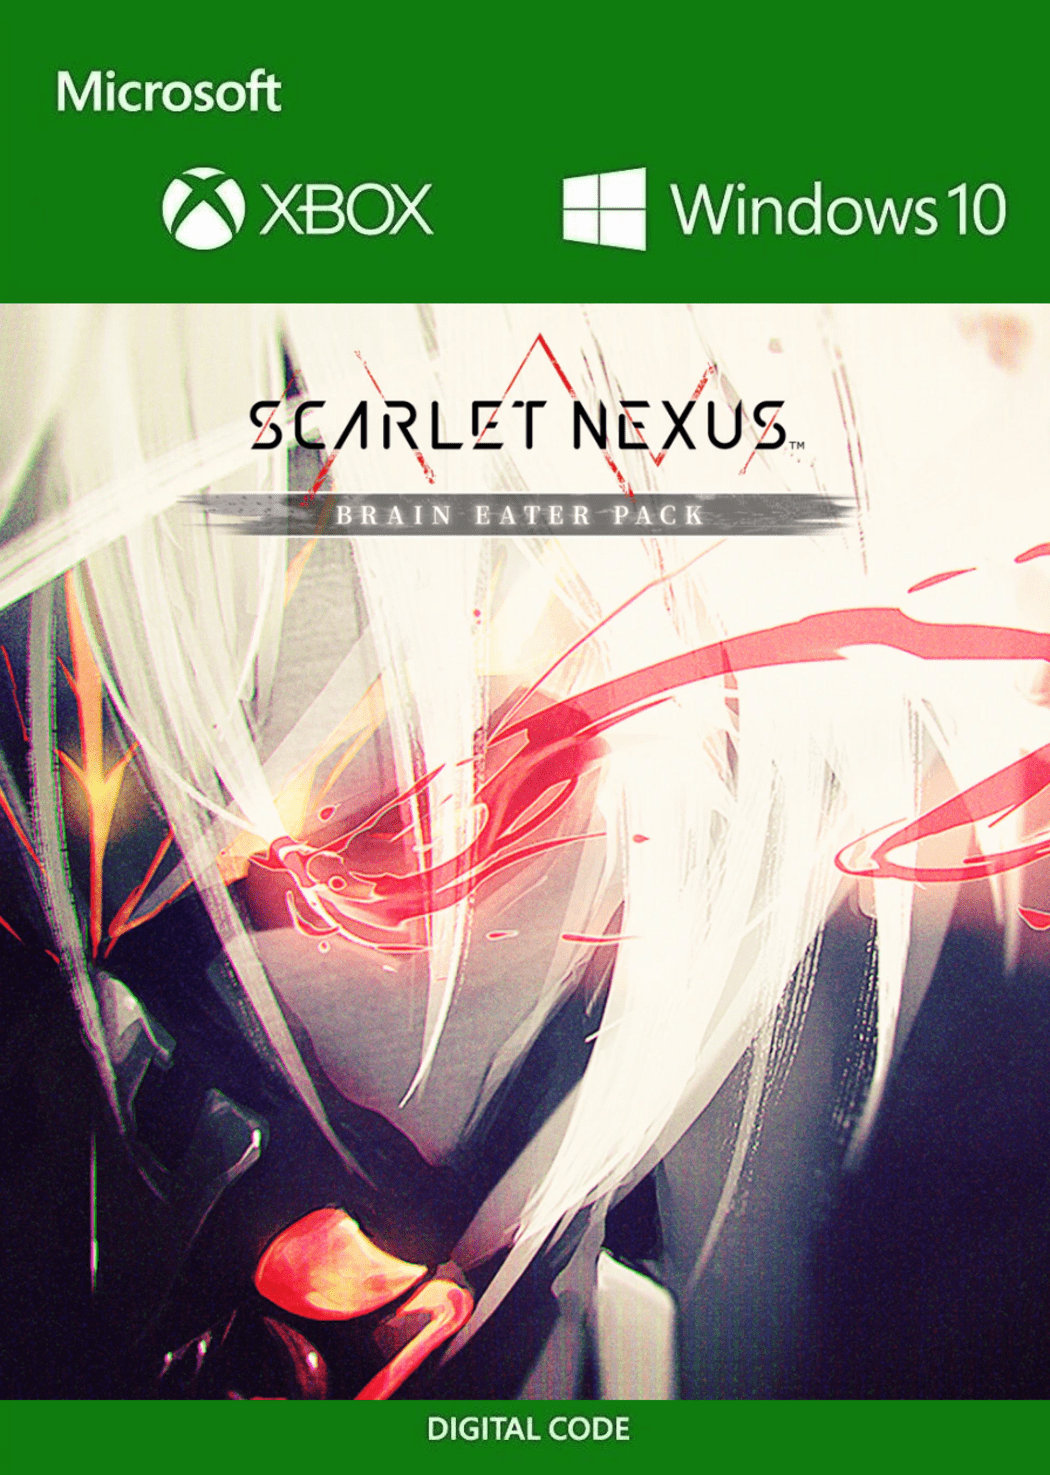 Scarlet Nexus DLC Brain Eater Pack Released With New Story Content